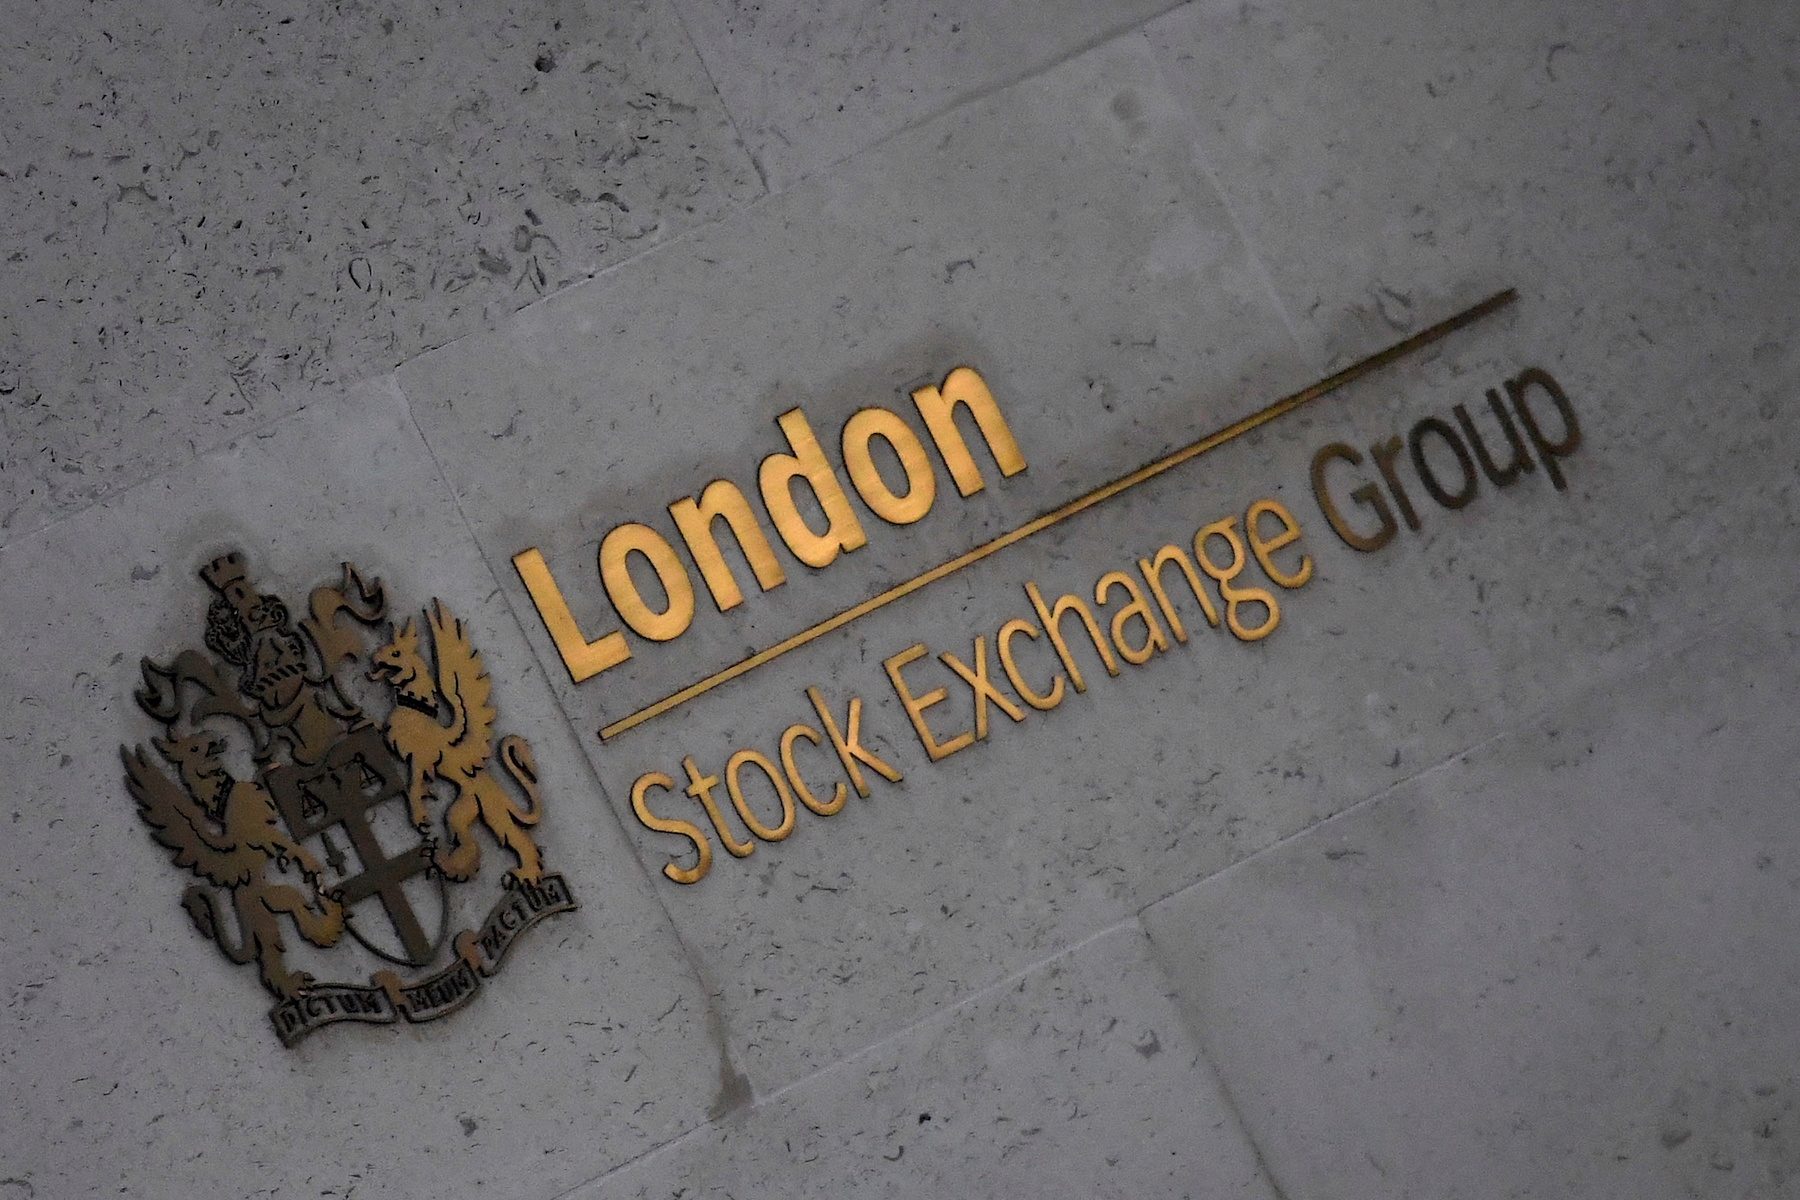 London Stock Exchange Group suspends all services in Russia